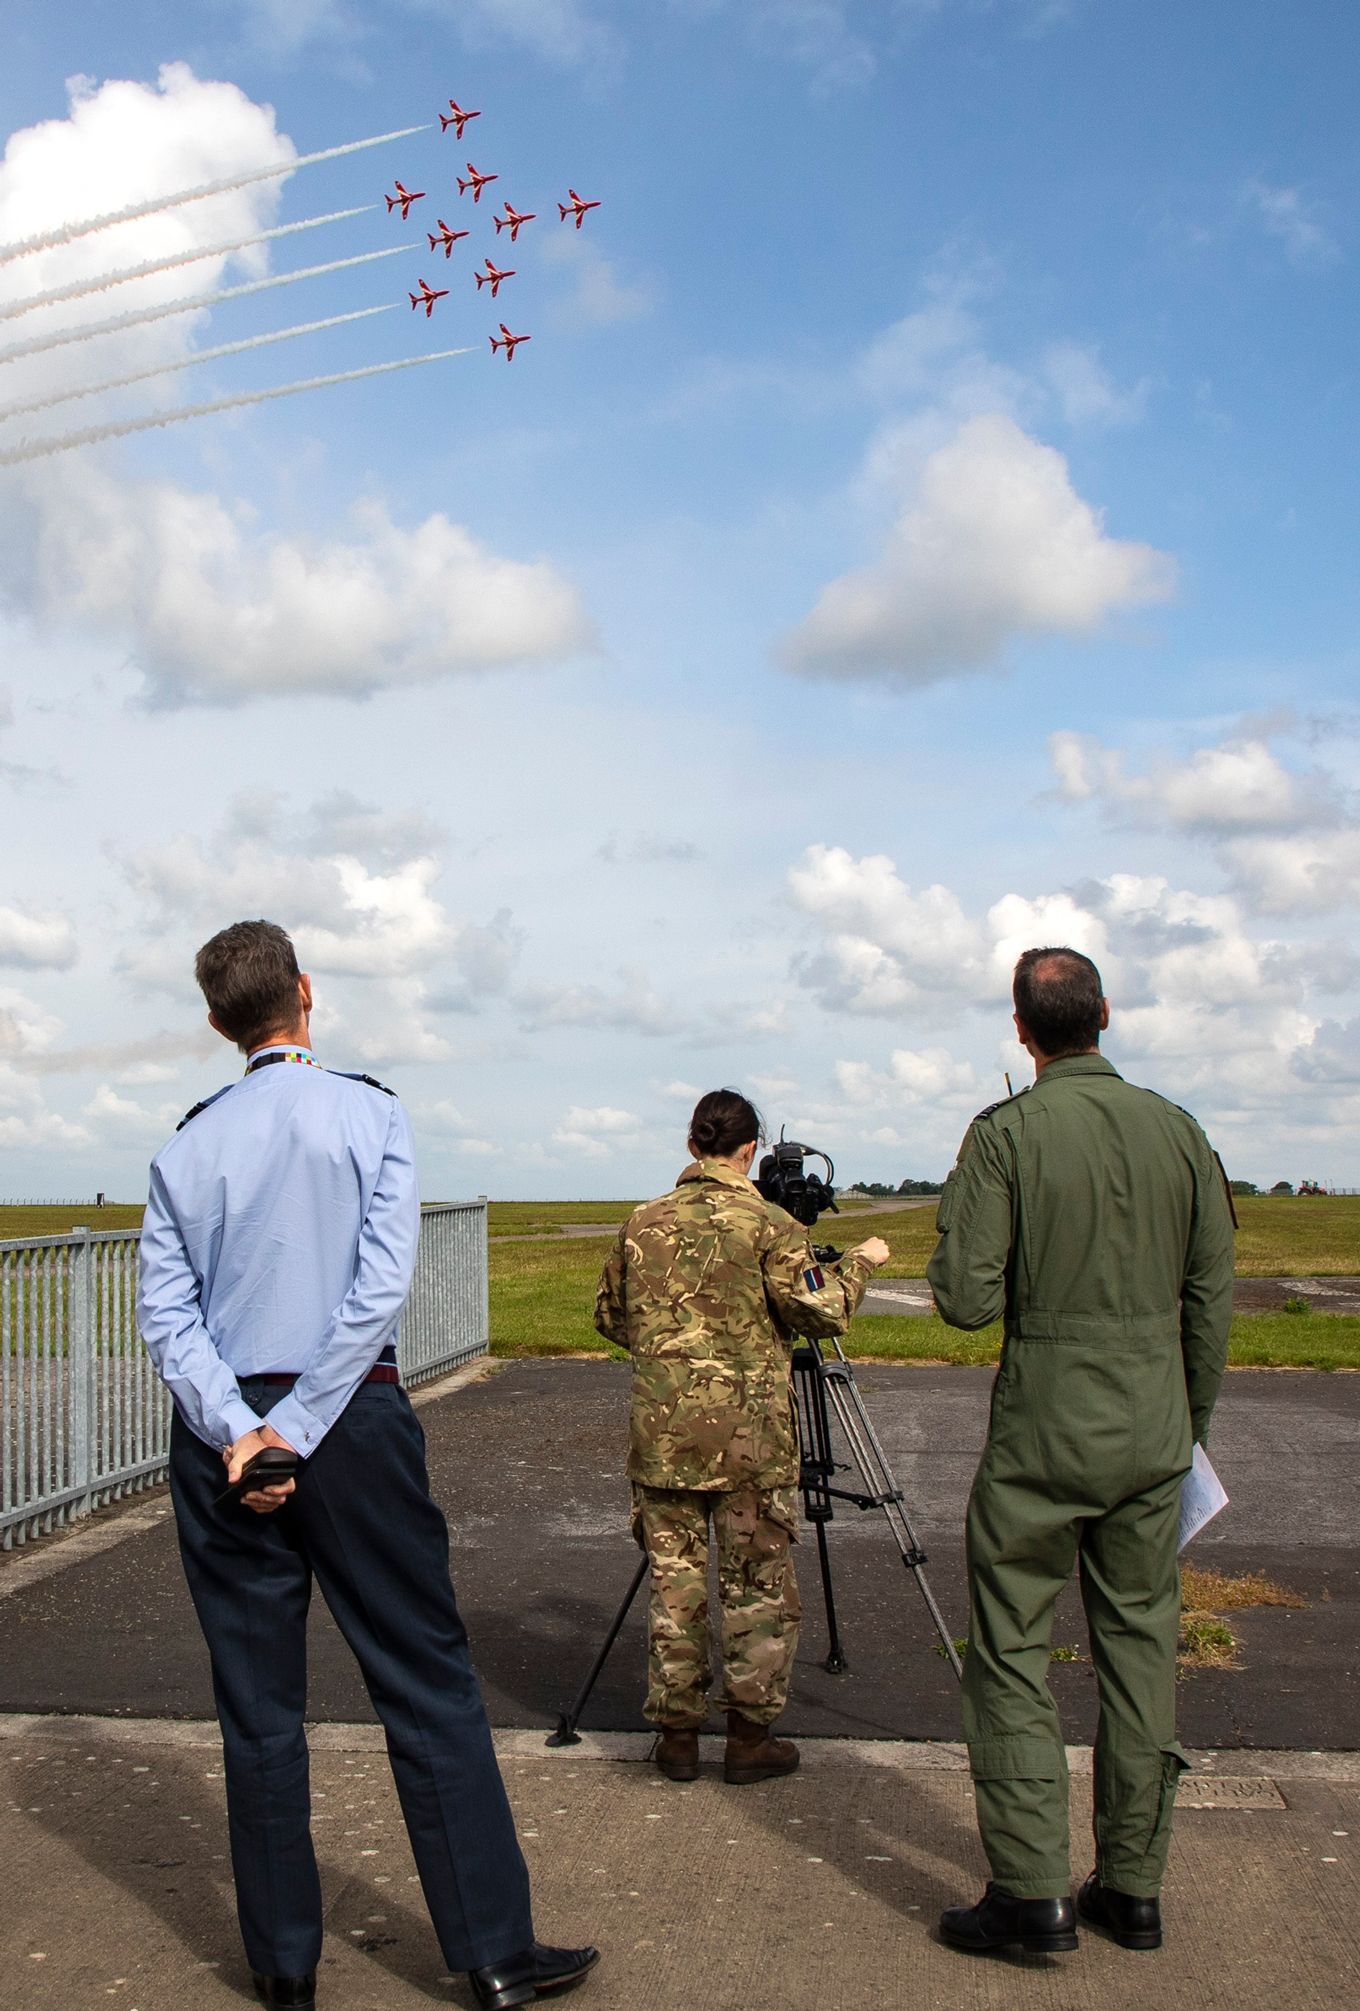 Air Officer Commanding, 22 Group, Air Vice-Marshal Warren James, observing the team.